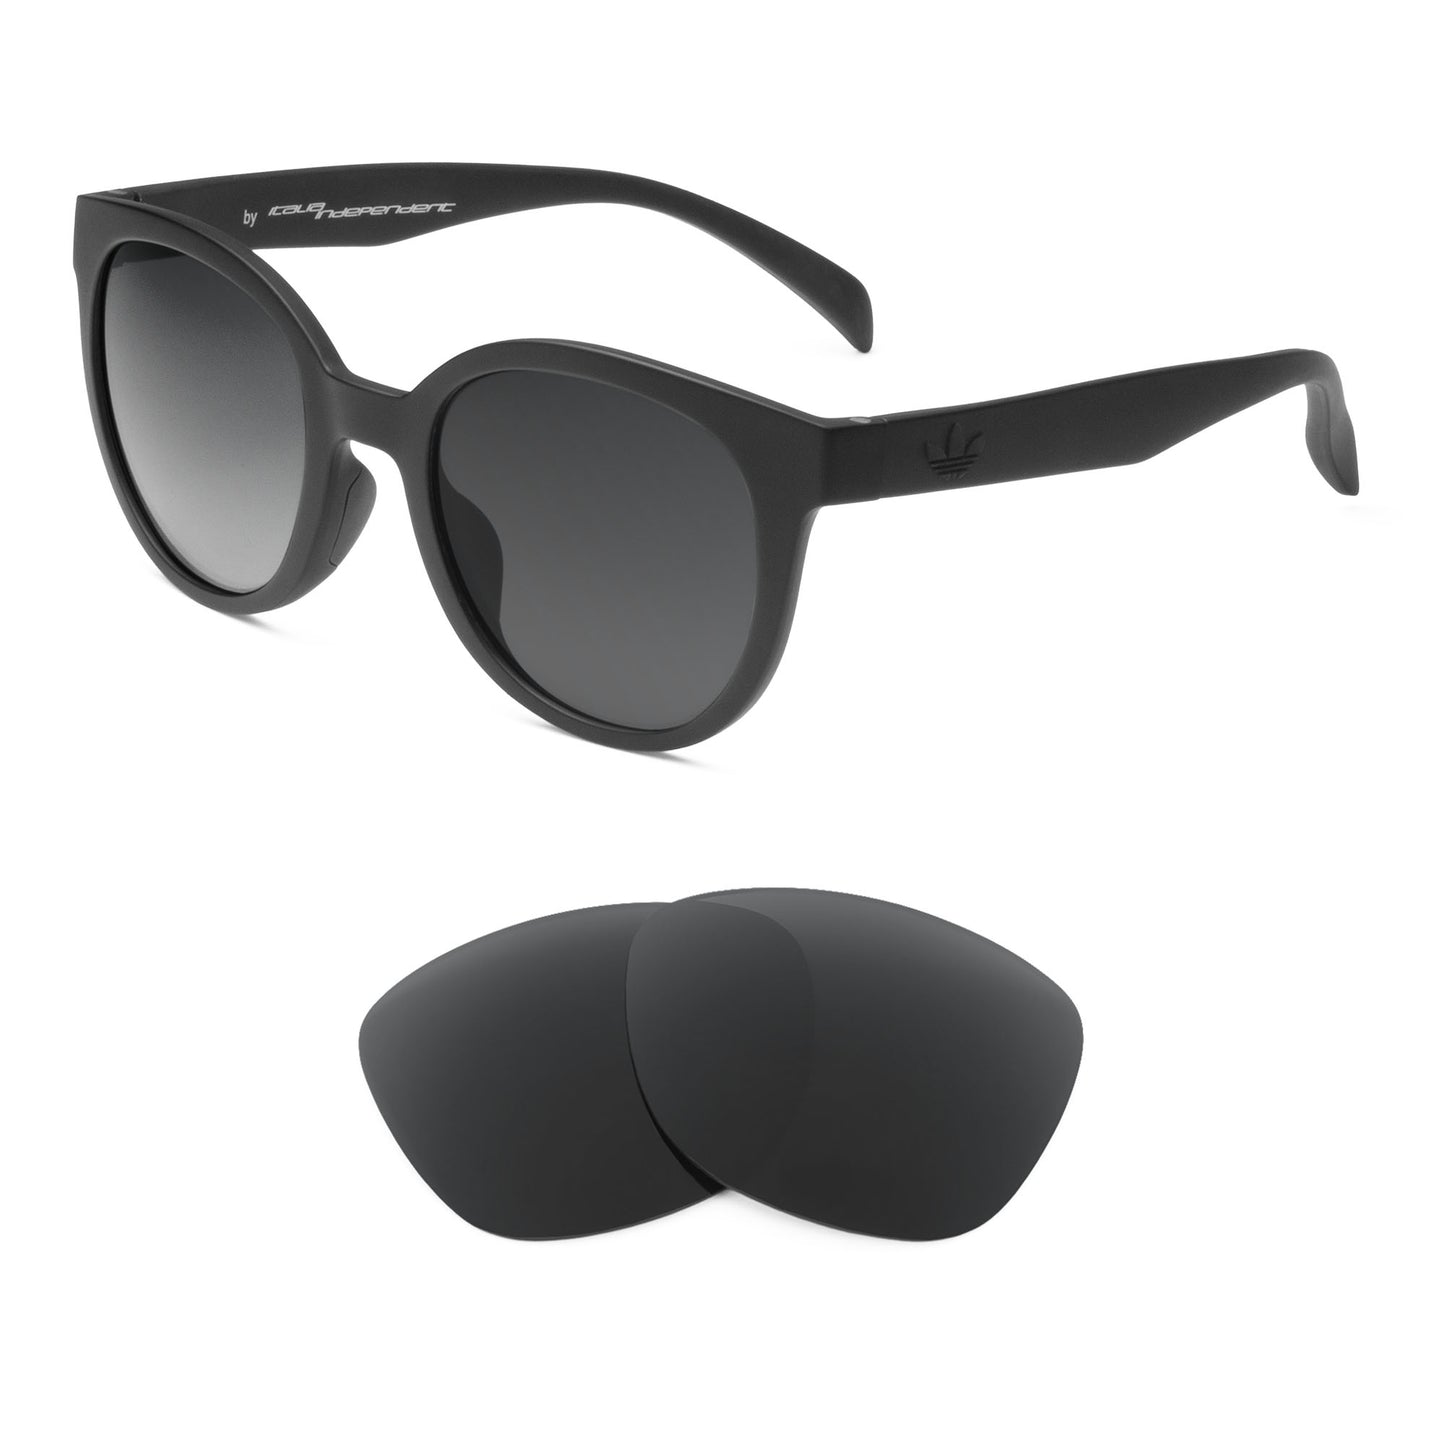 Adidas AOR002 sunglasses with replacement lenses